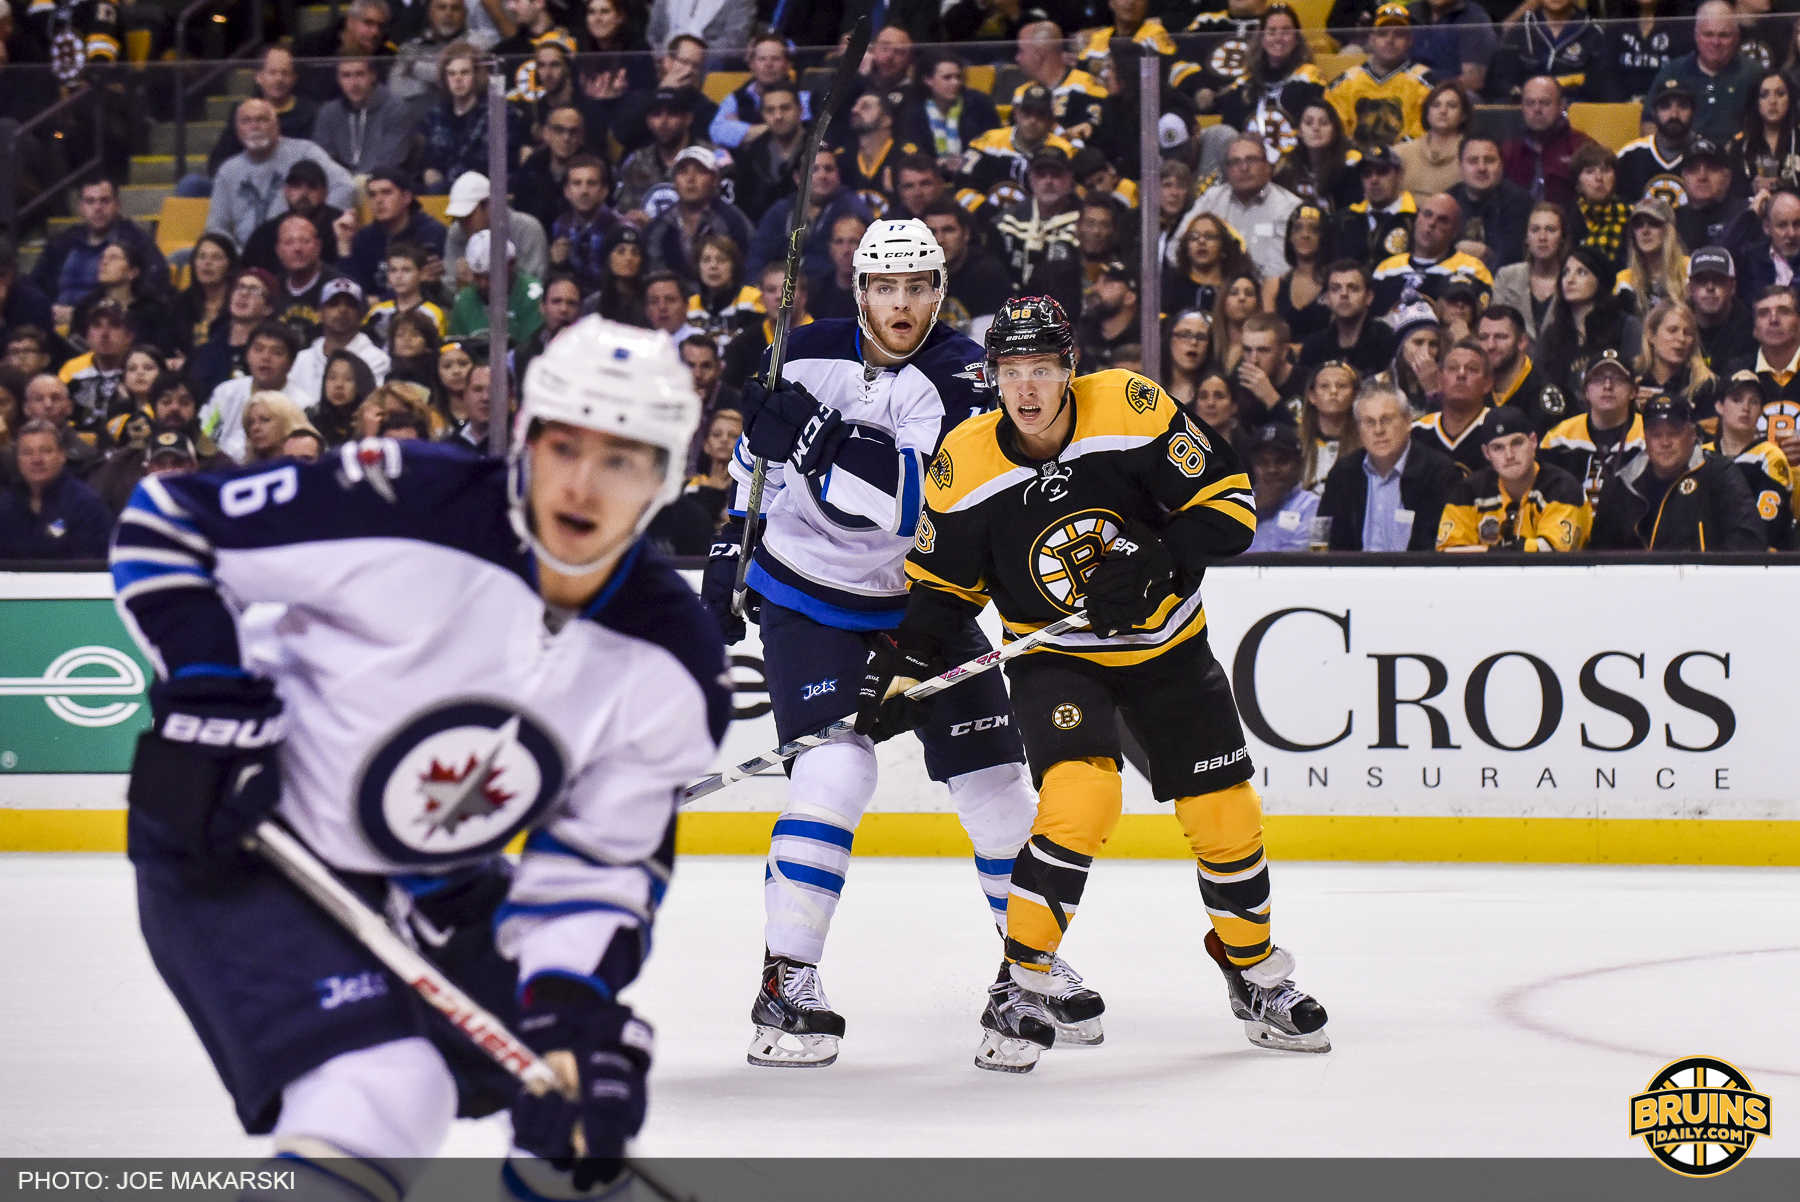 Bruins-Jets preview